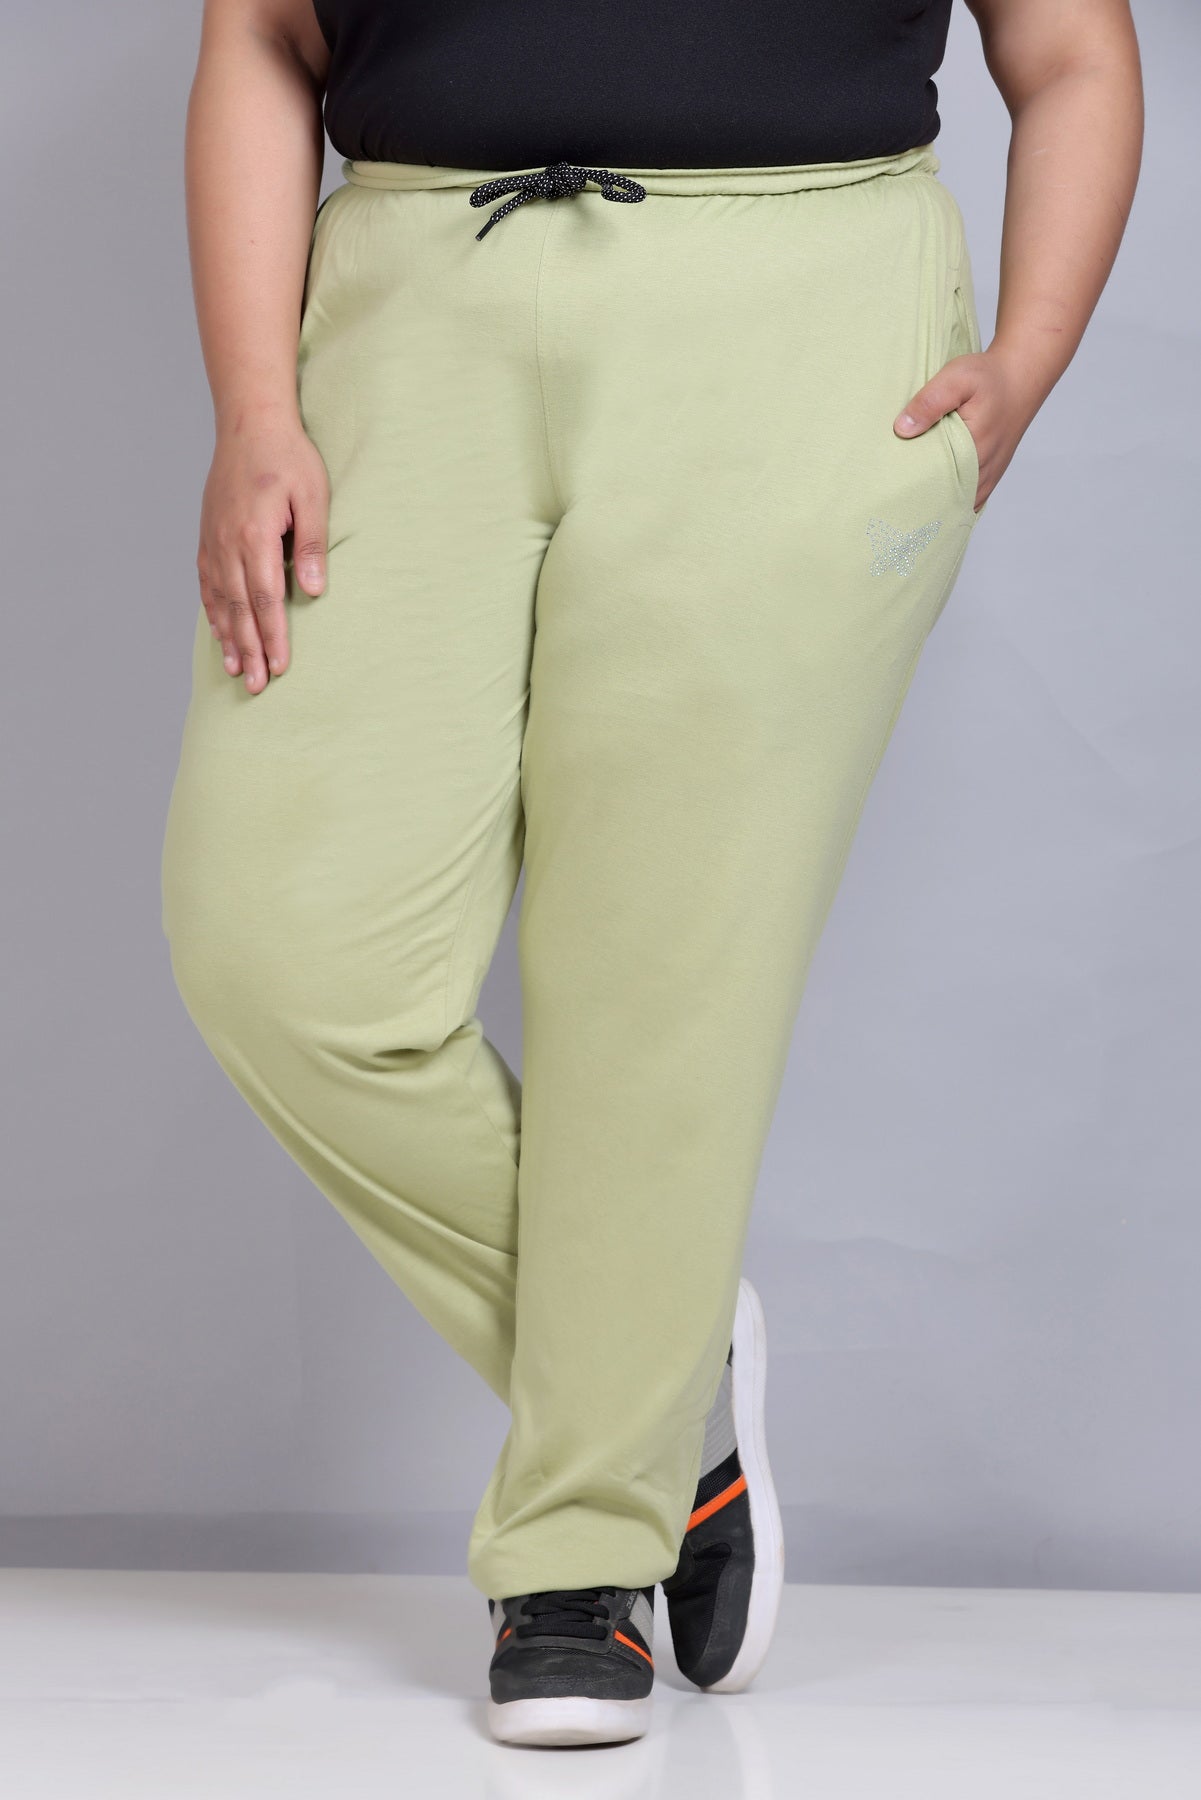 Buy Cotton Cardamom Green Track pants for Women online in India -  Cupidclothings – Cupid Clothings